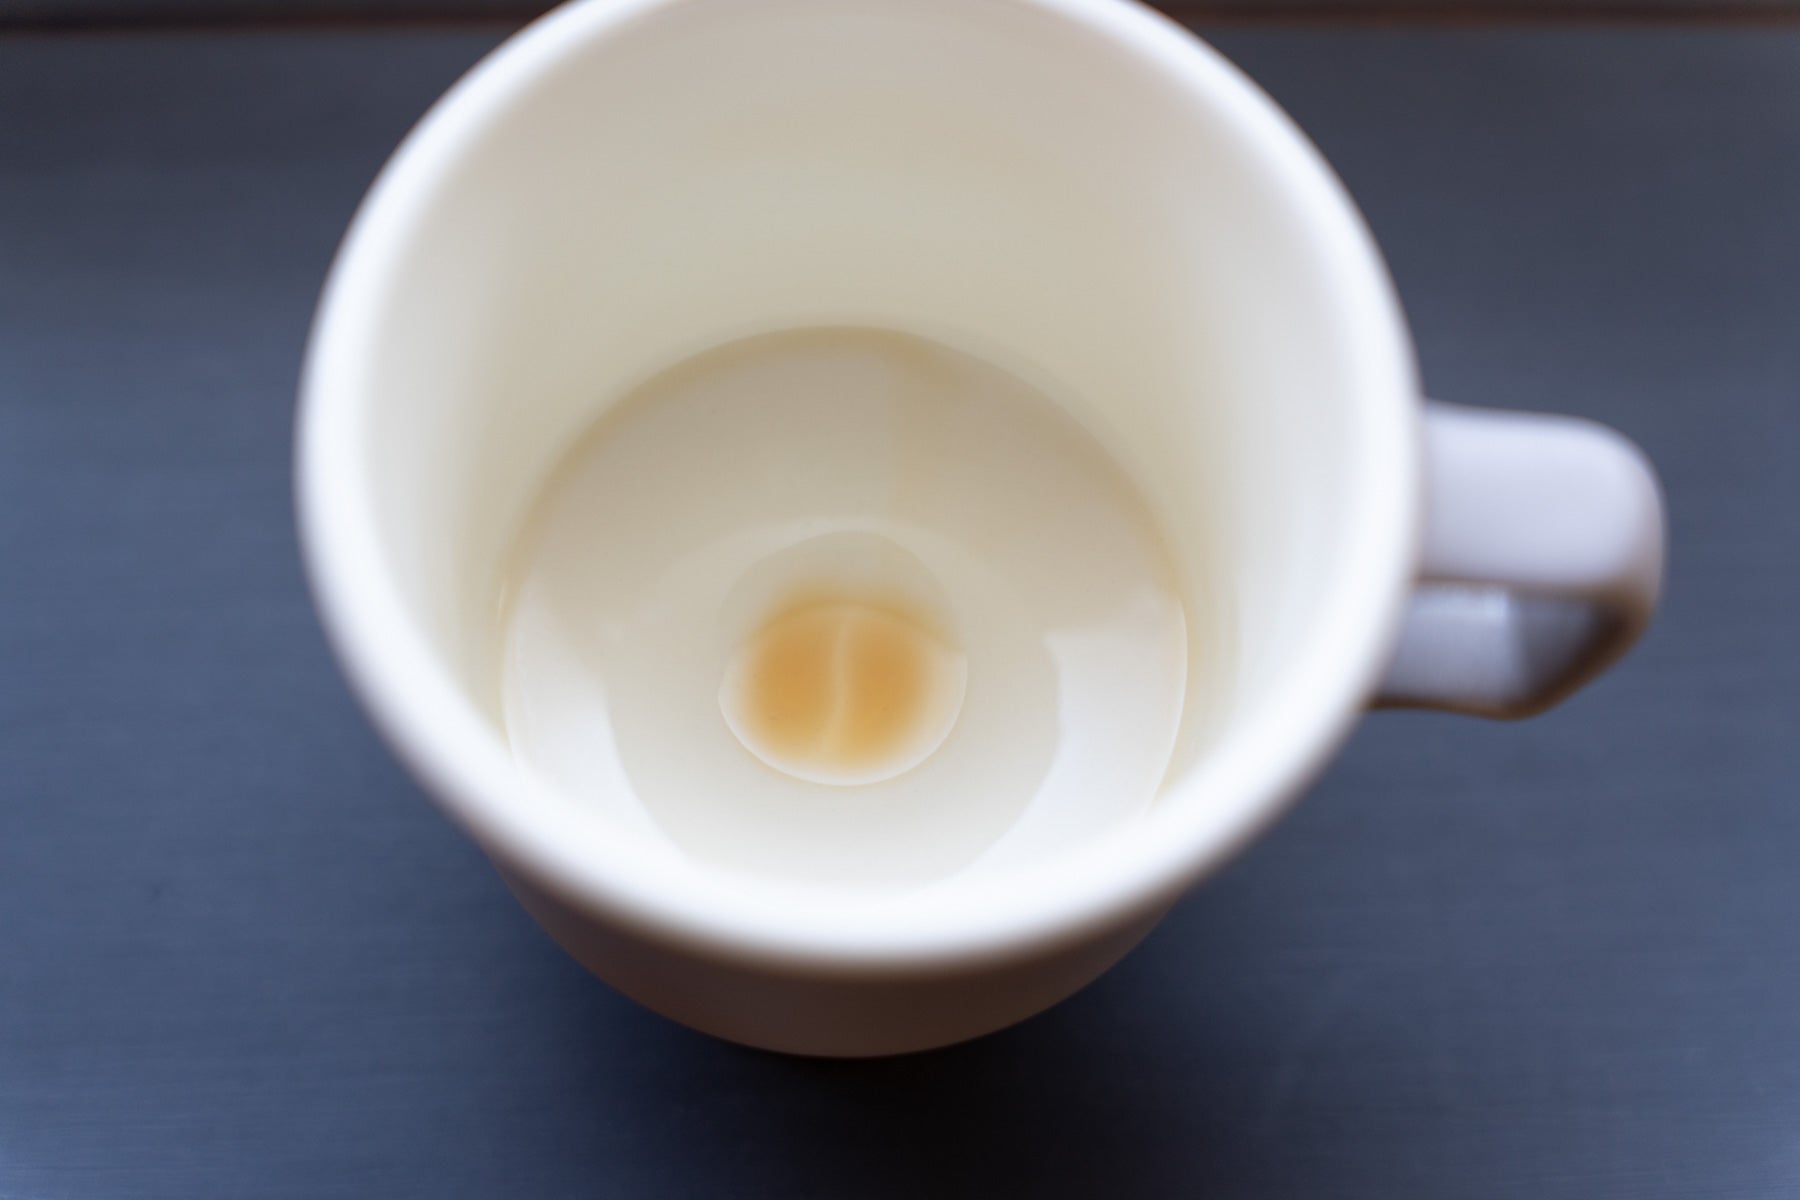 Gimmick that coffee beans appear on the bottom of the cup only